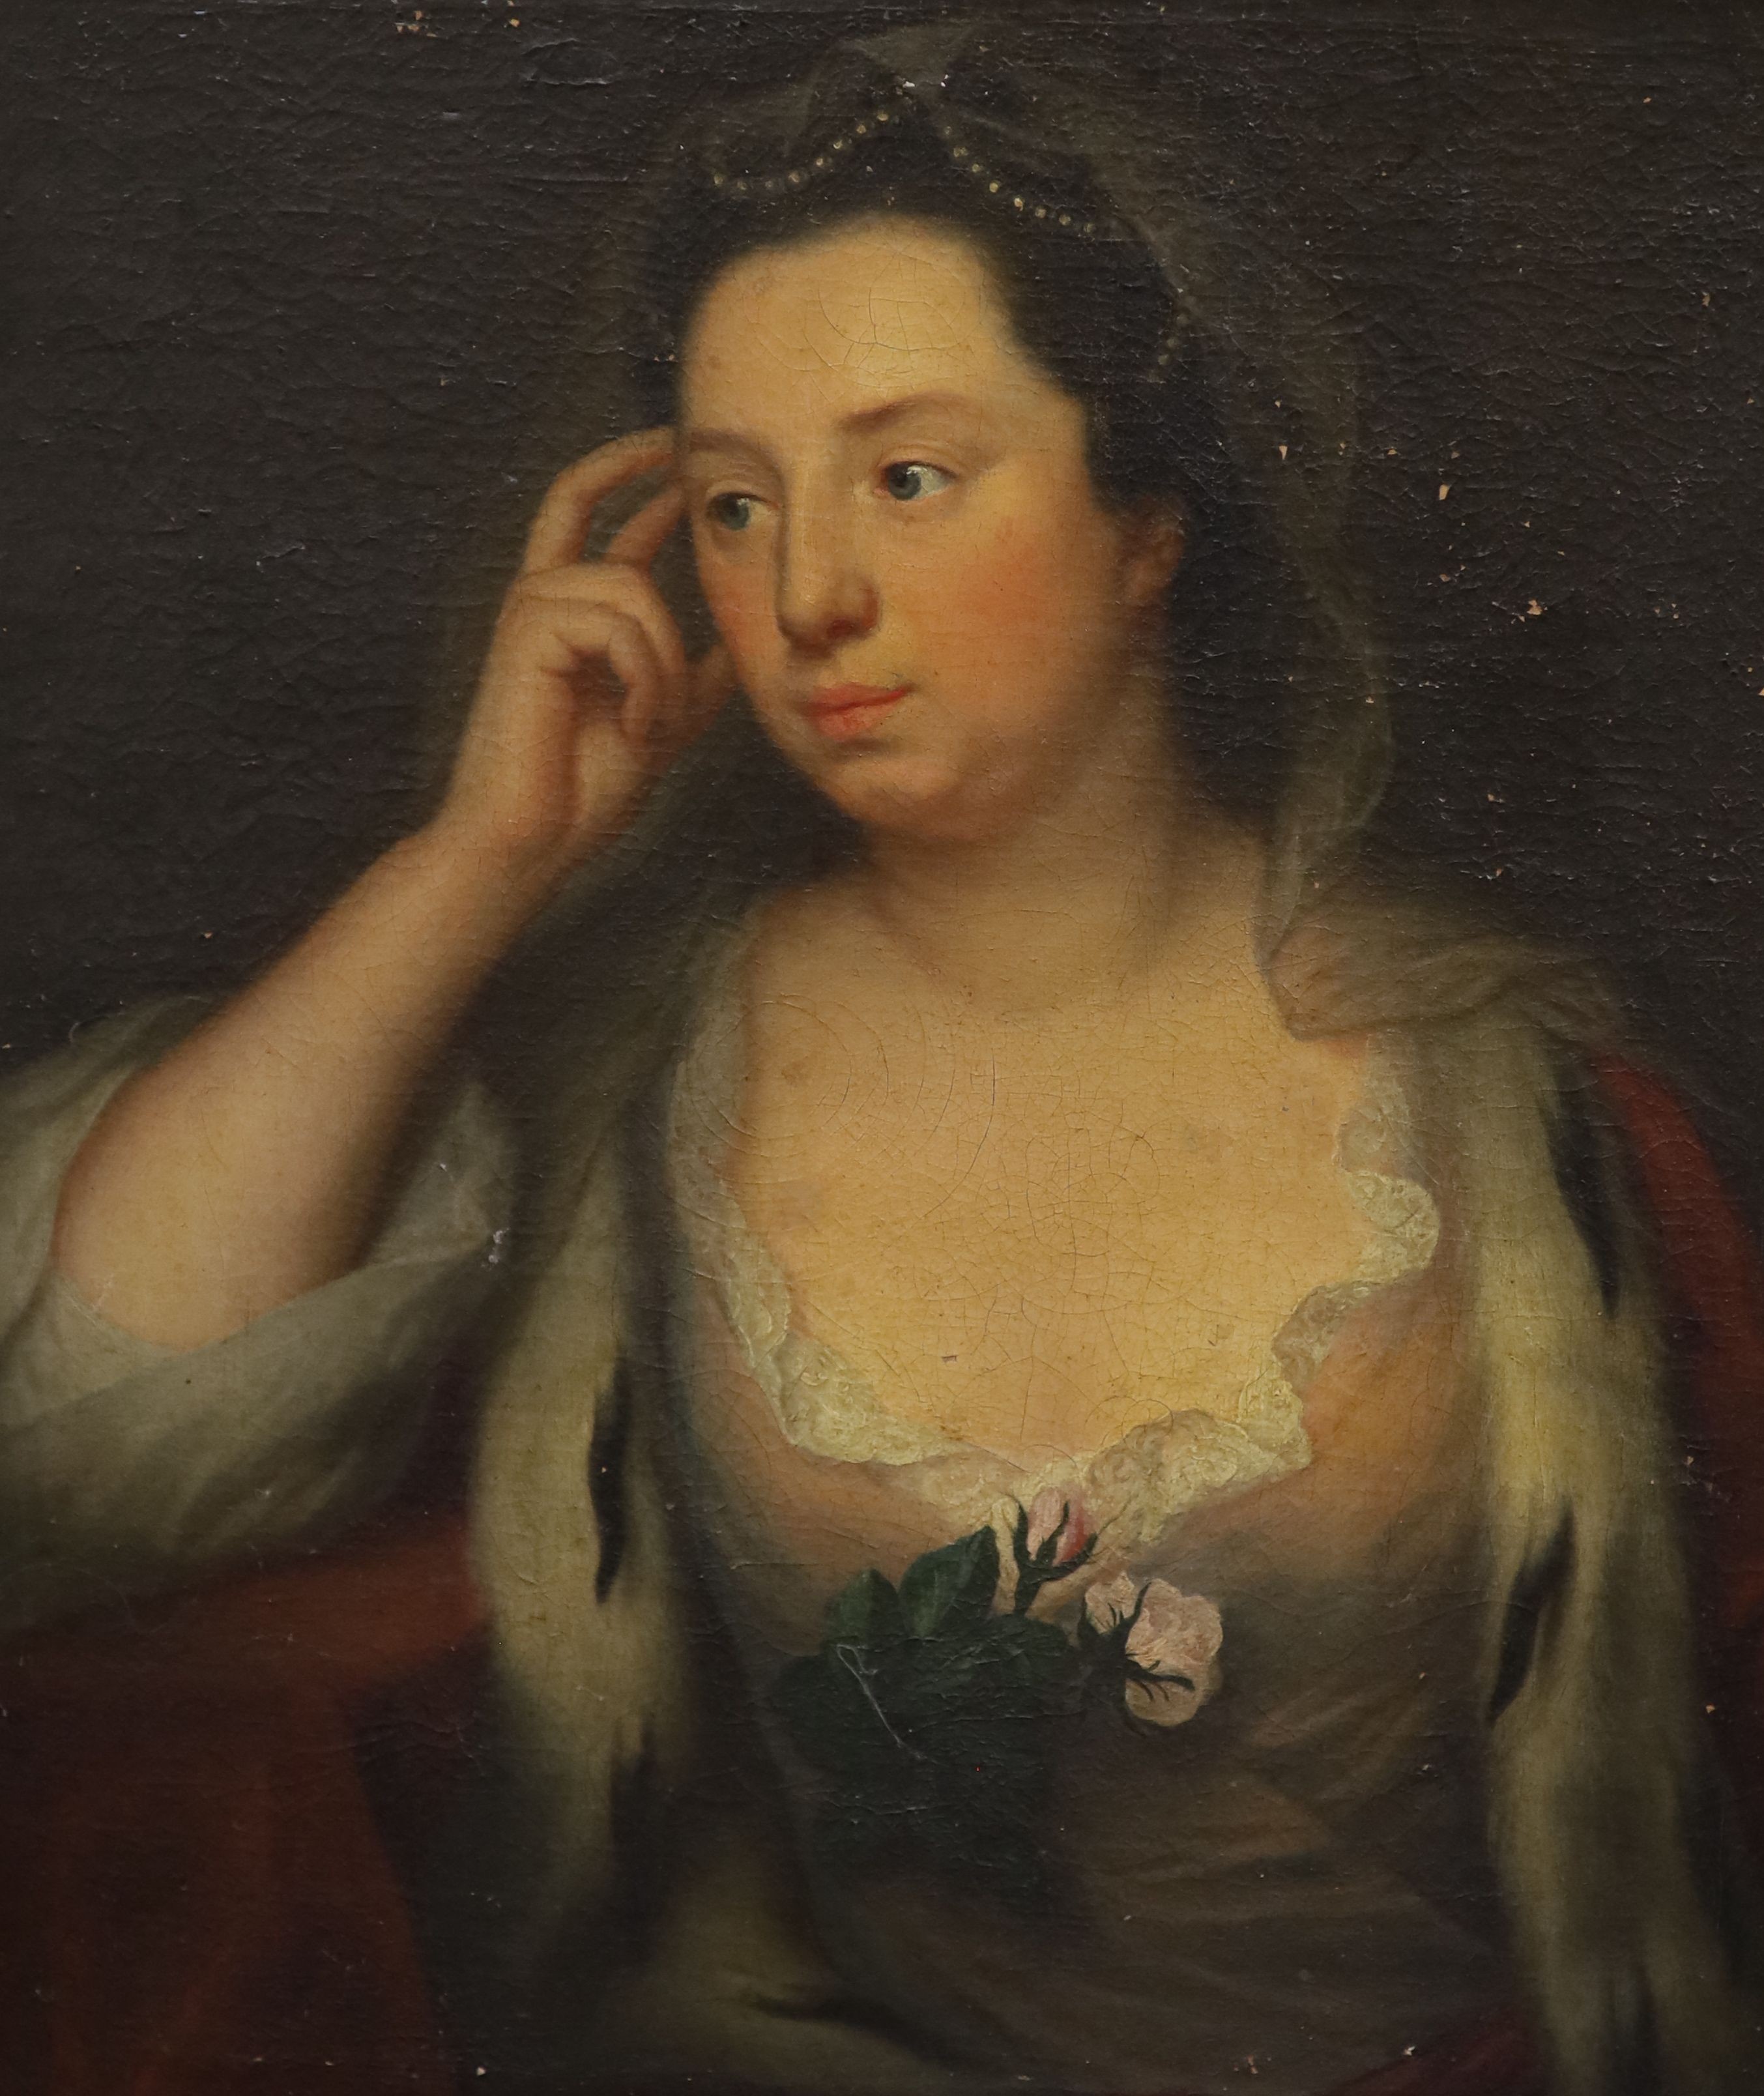 Mid 18th century English School, Portrait of a lady with pearls in her hair, Oil on canvas, 75 x 62cm.